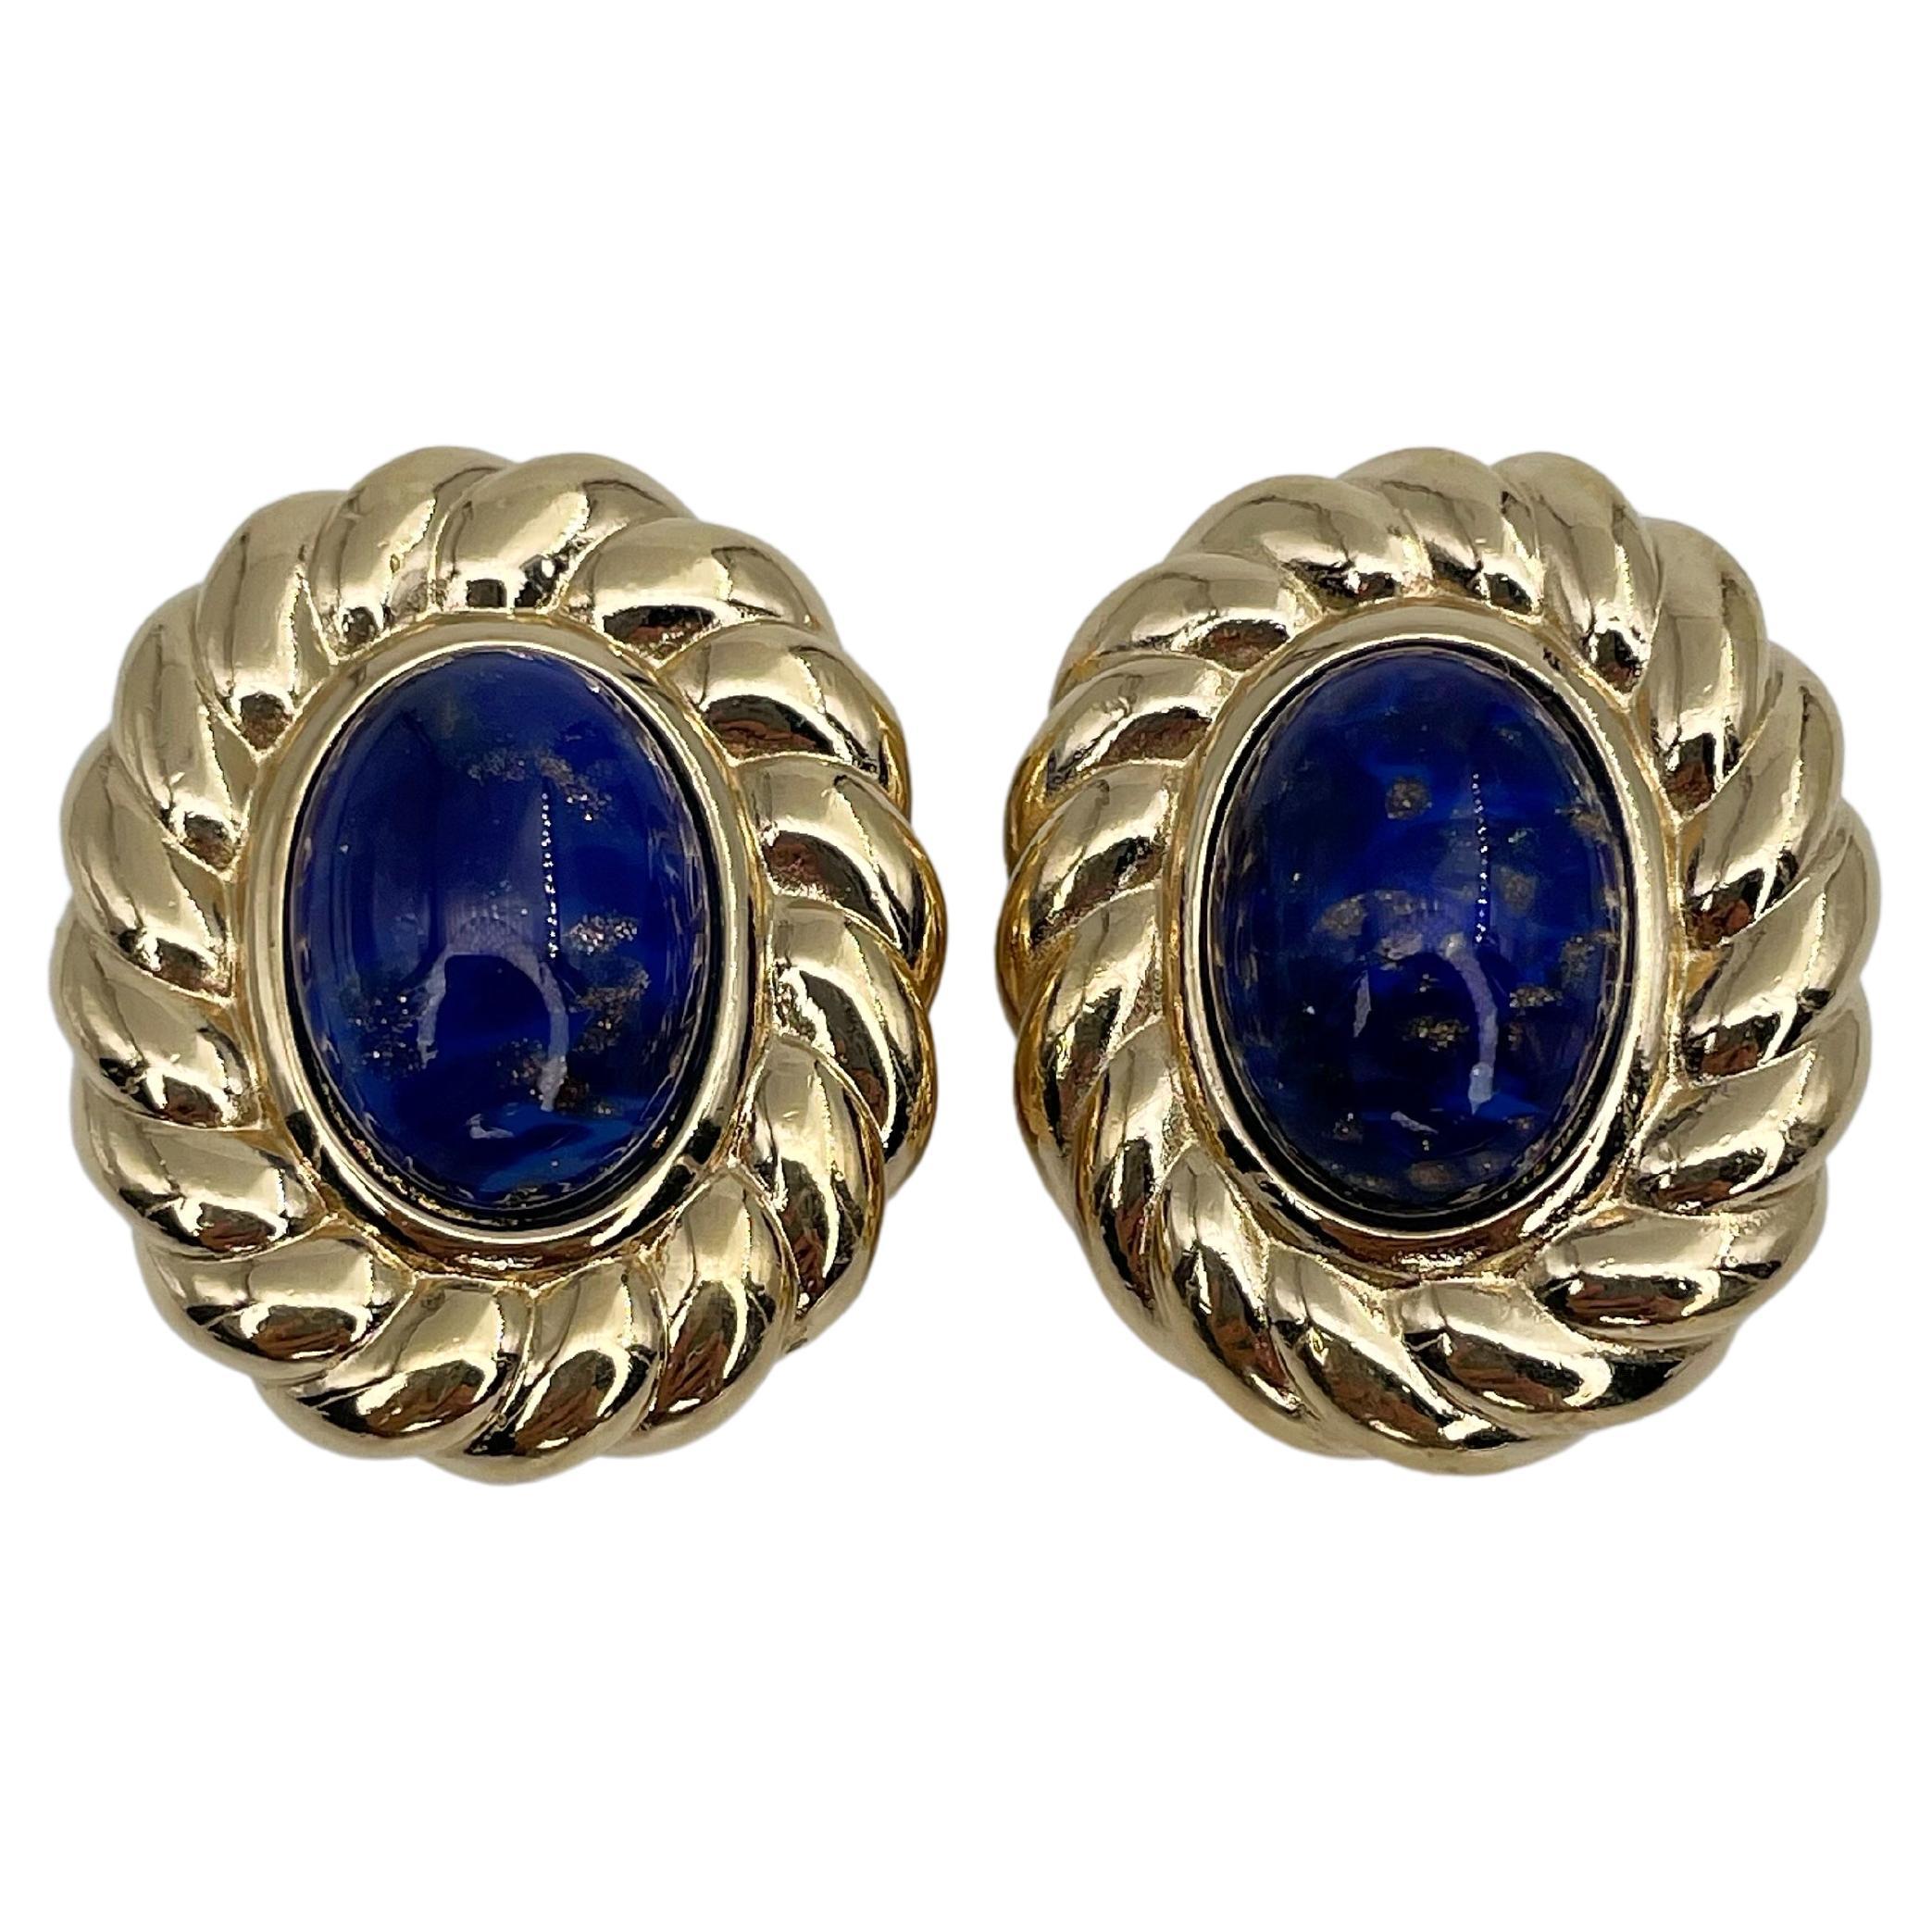 1980s Vintage Christian Dior Gold Tone Faux Lapis Lazuli Oval Clip on Earrings